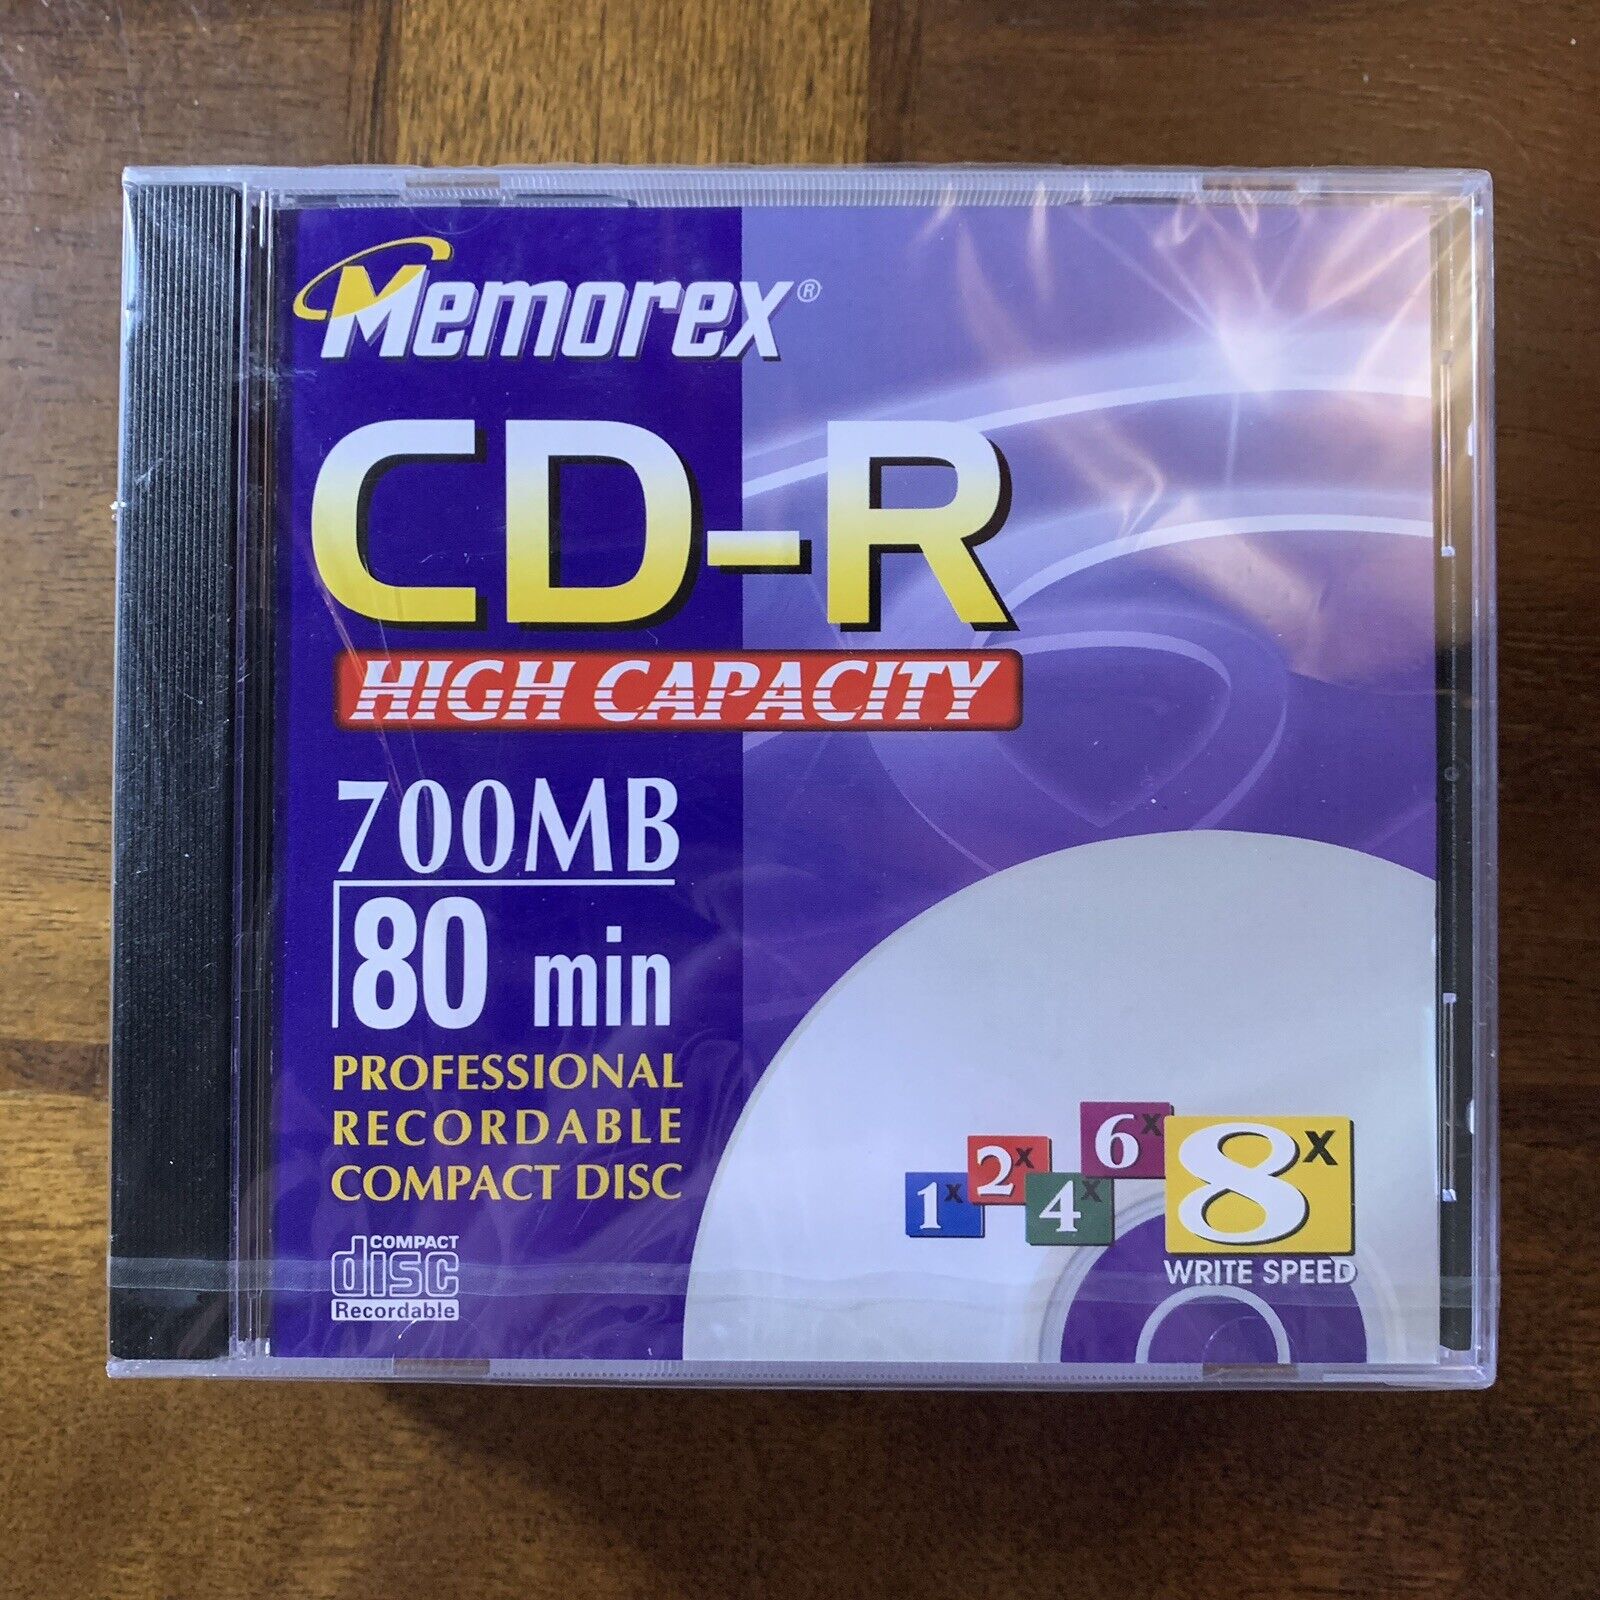 MEMOREX~CD-R 700 MB 80 MIN RECORDABLE CD'S NEW LOT OF 4 8X SPEED HIGH CAPACITY